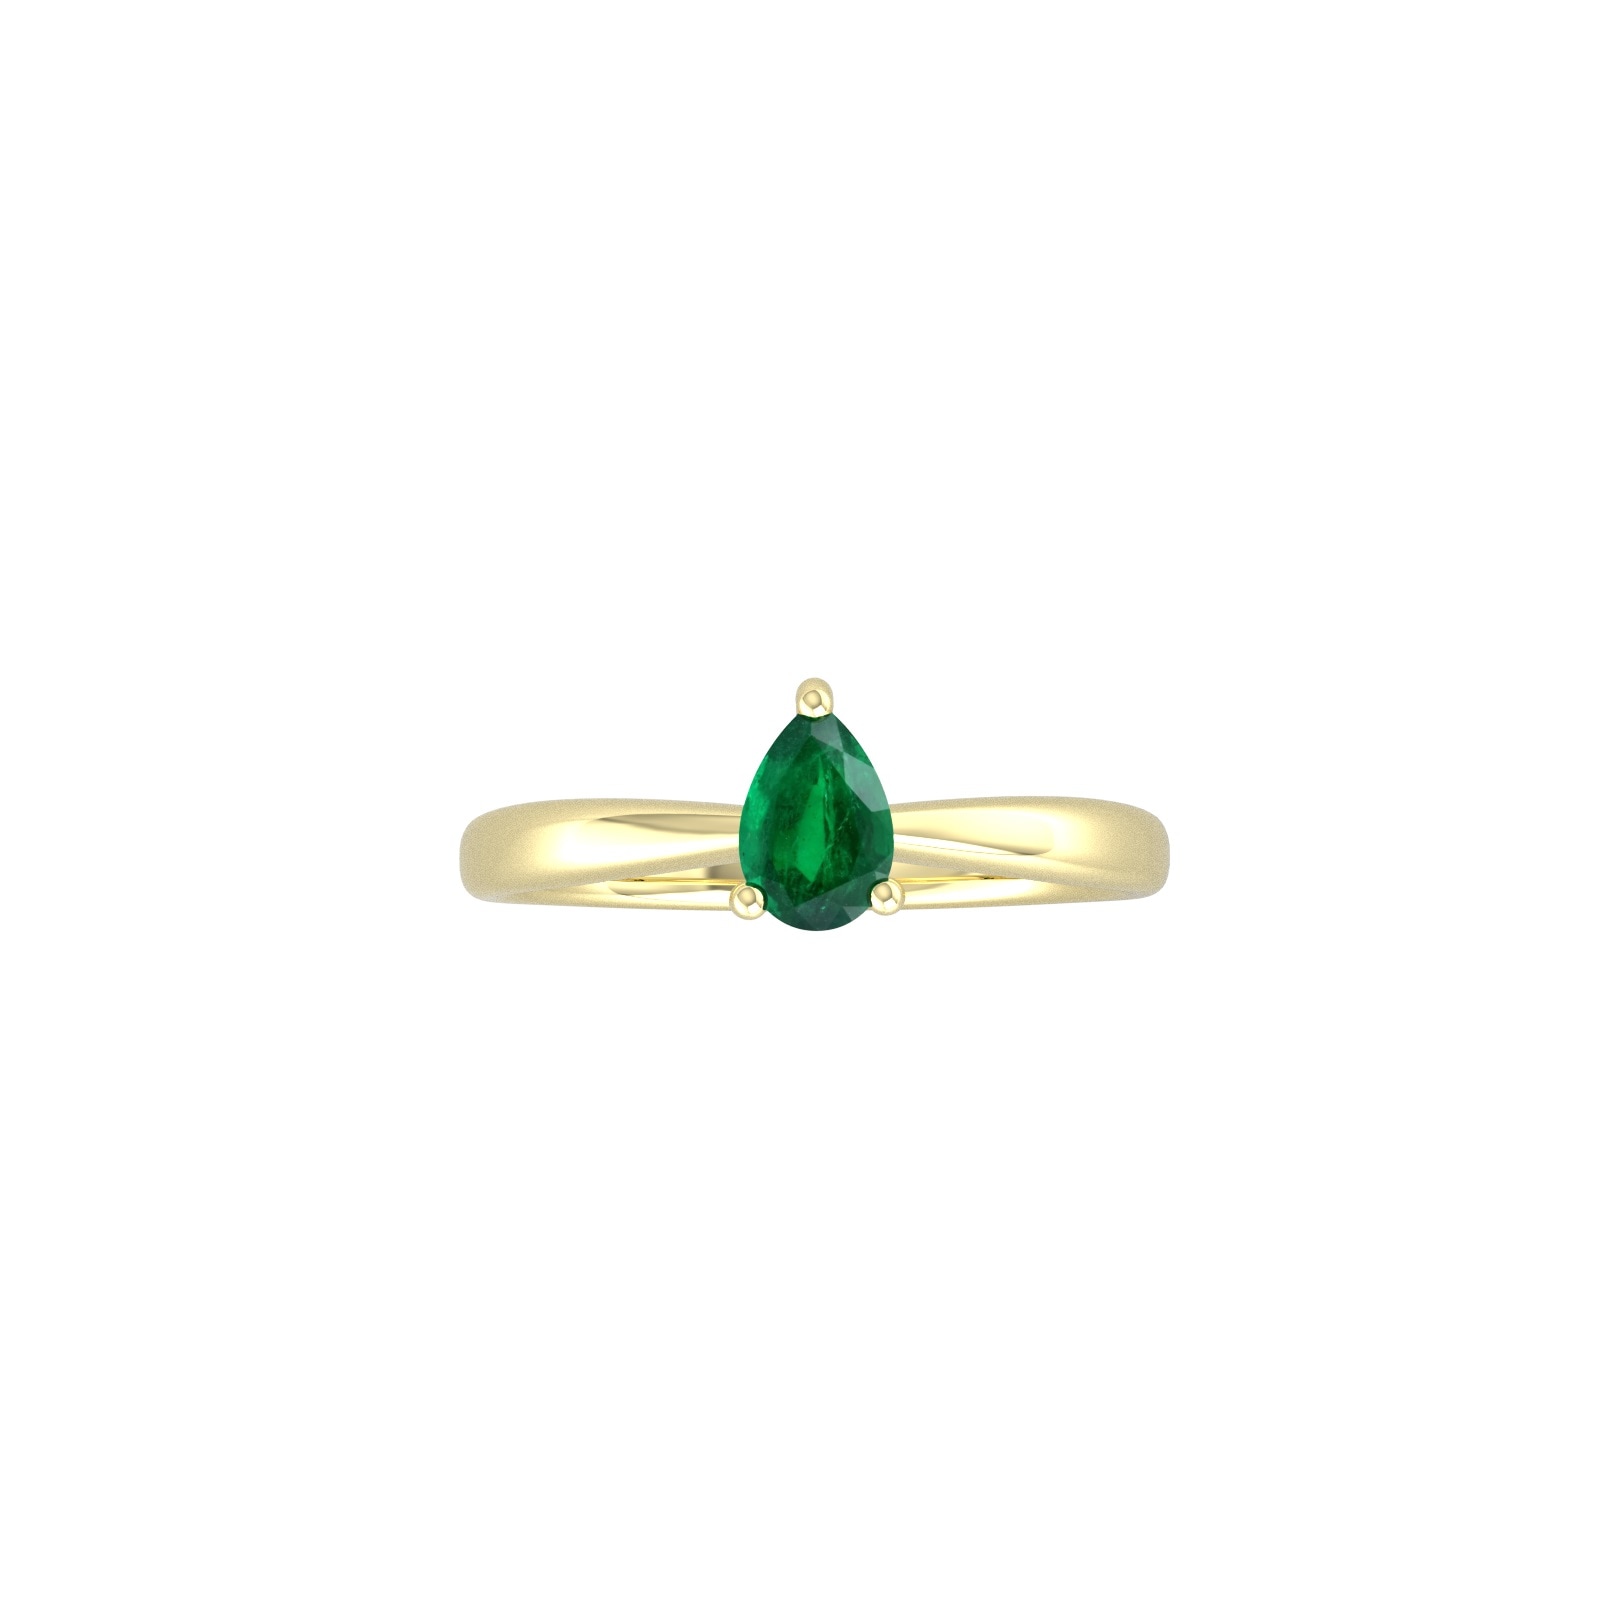 9ct Yellow Gold 4 Claw Pear Cut Emerald Ring